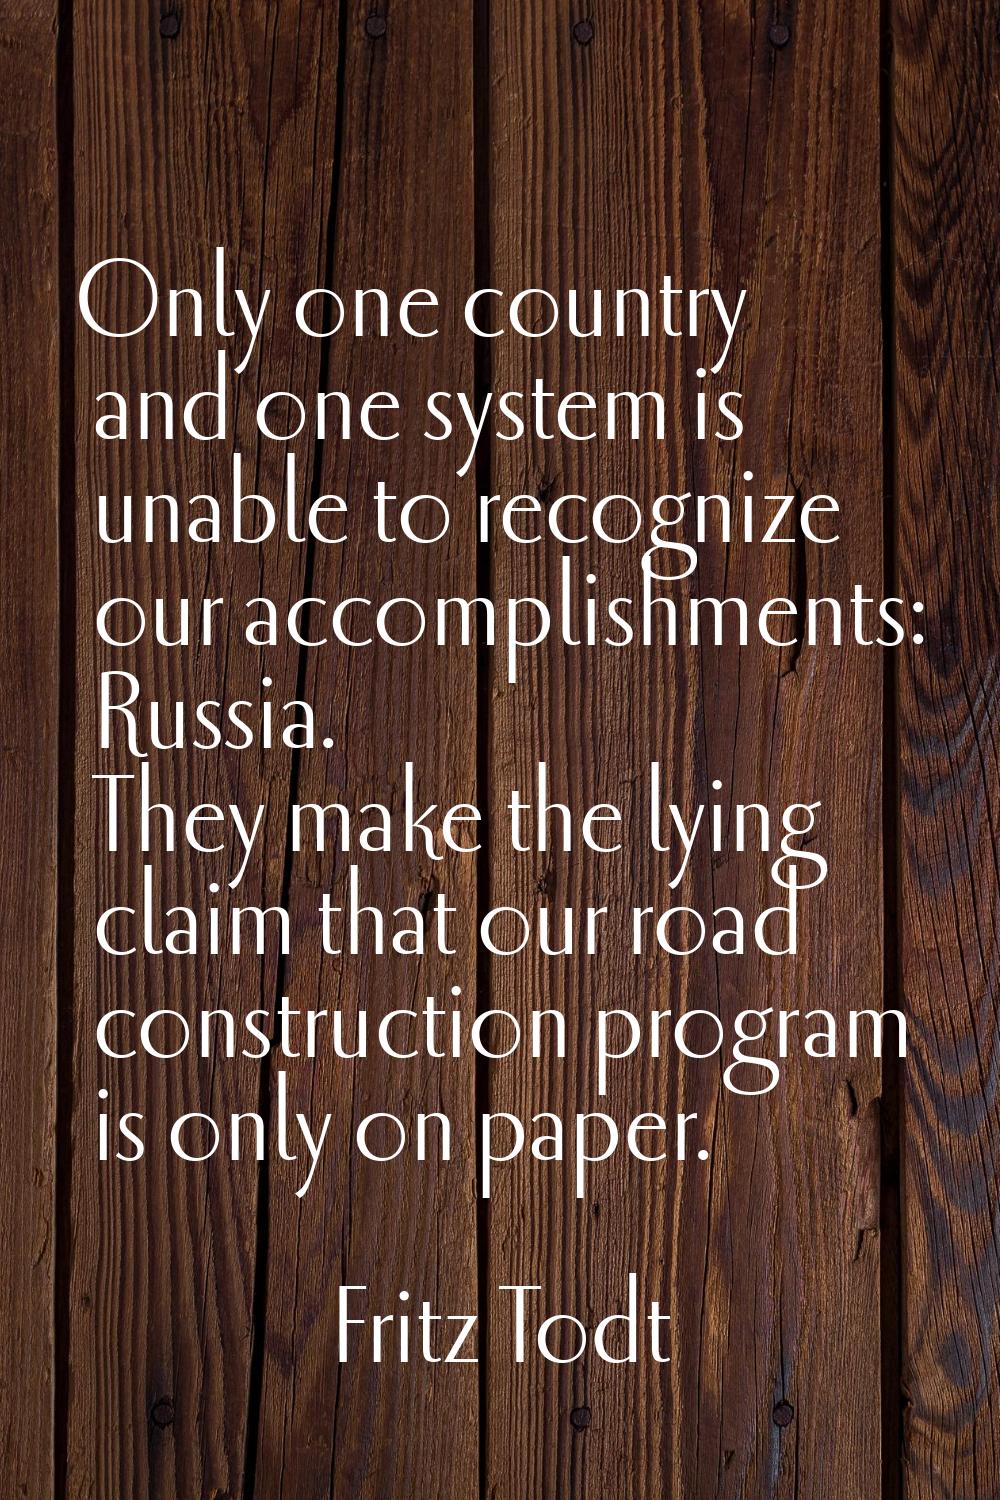 Only one country and one system is unable to recognize our accomplishments: Russia. They make the l